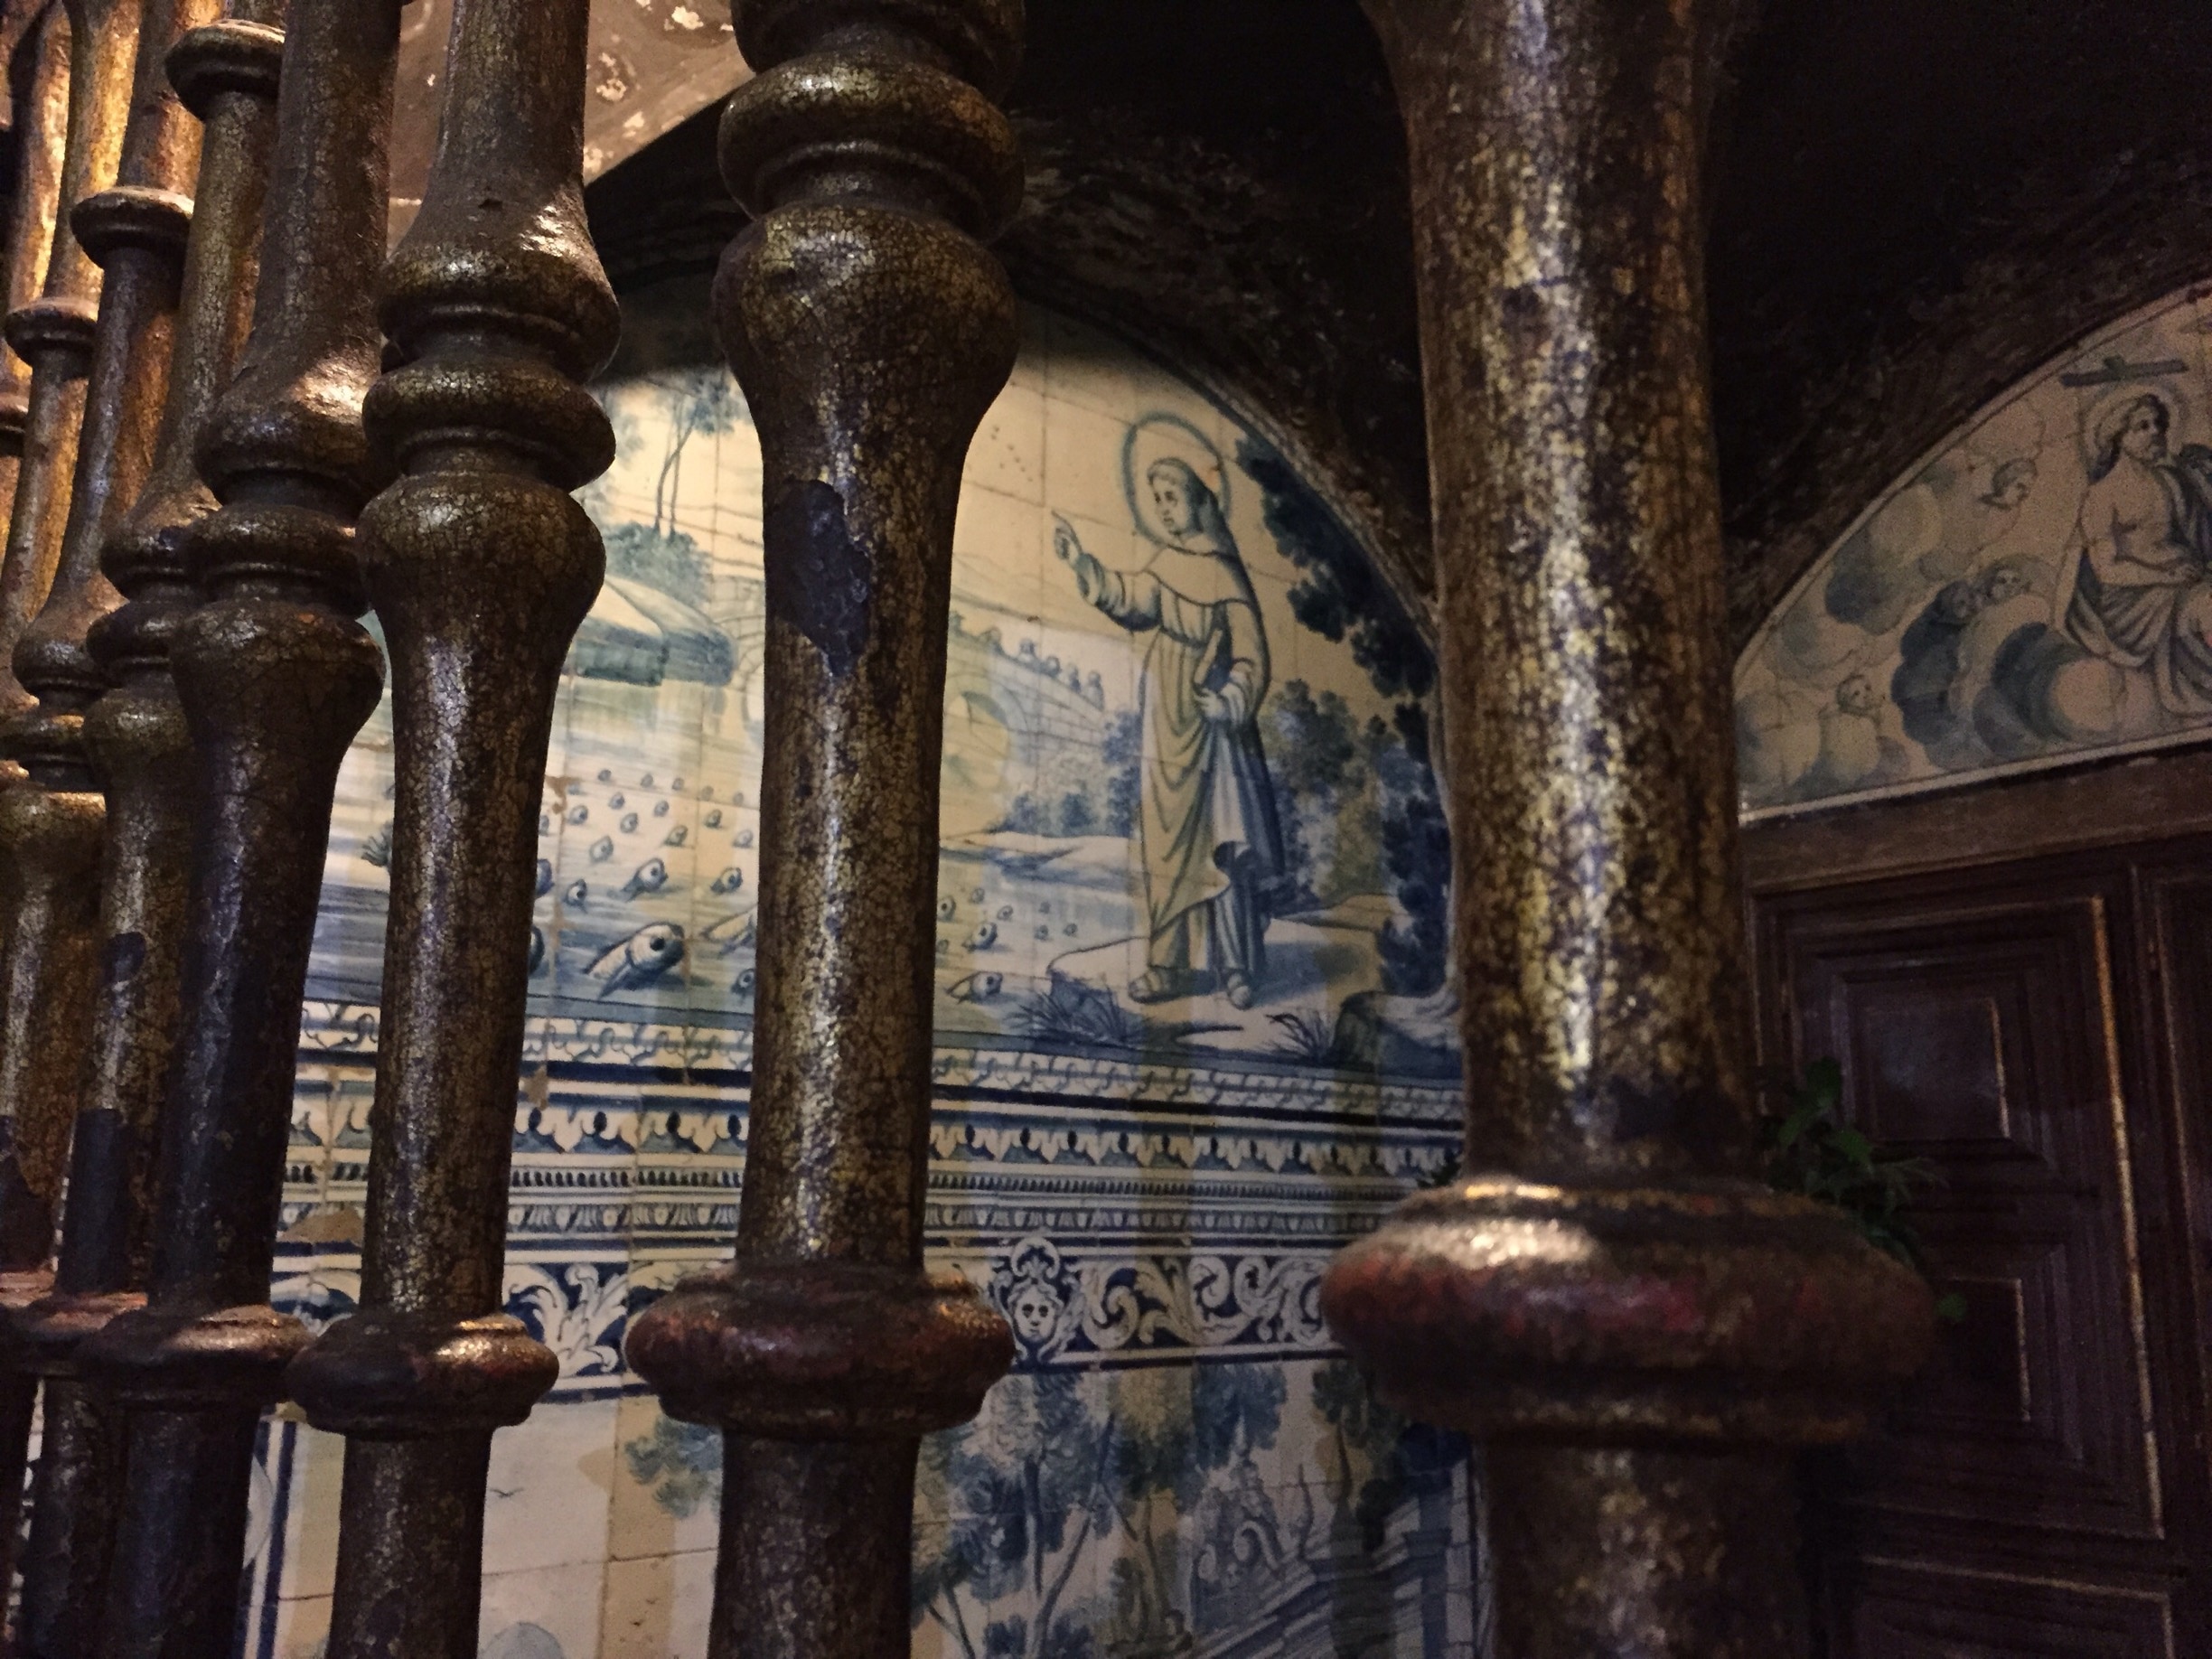 Tiles on the wall of St. Anthony's baptismal font